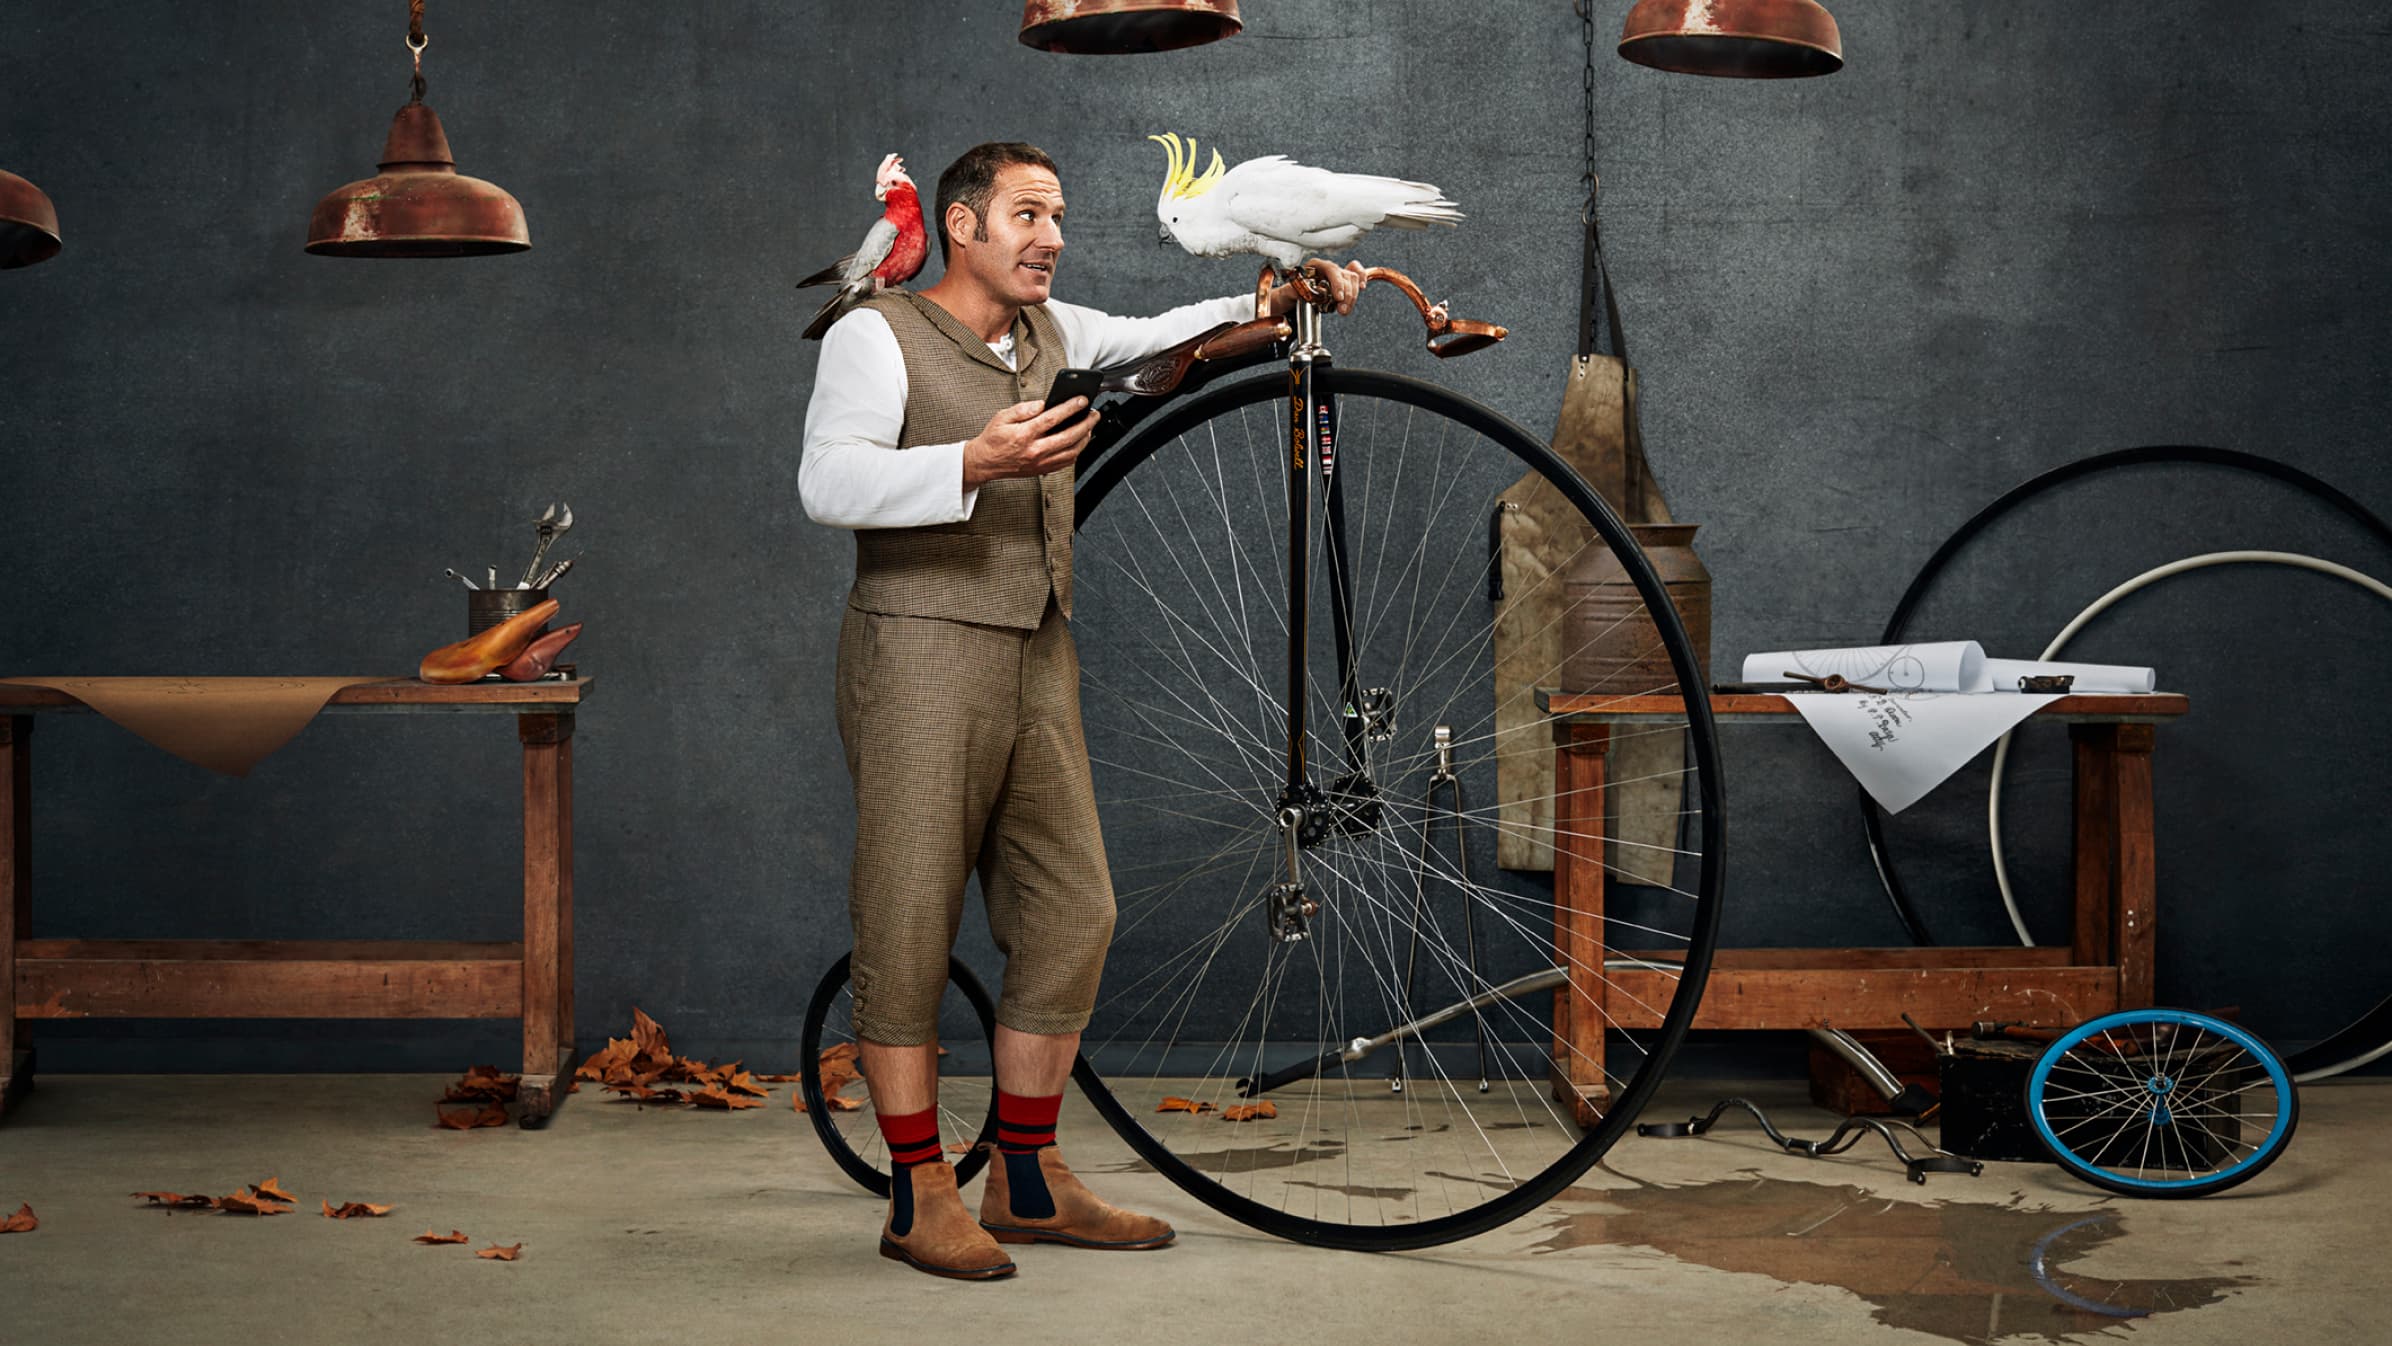 Dan Blowell stands with his penny-farthing bicycle, where a cockatoo bird randomly sits on the handles.